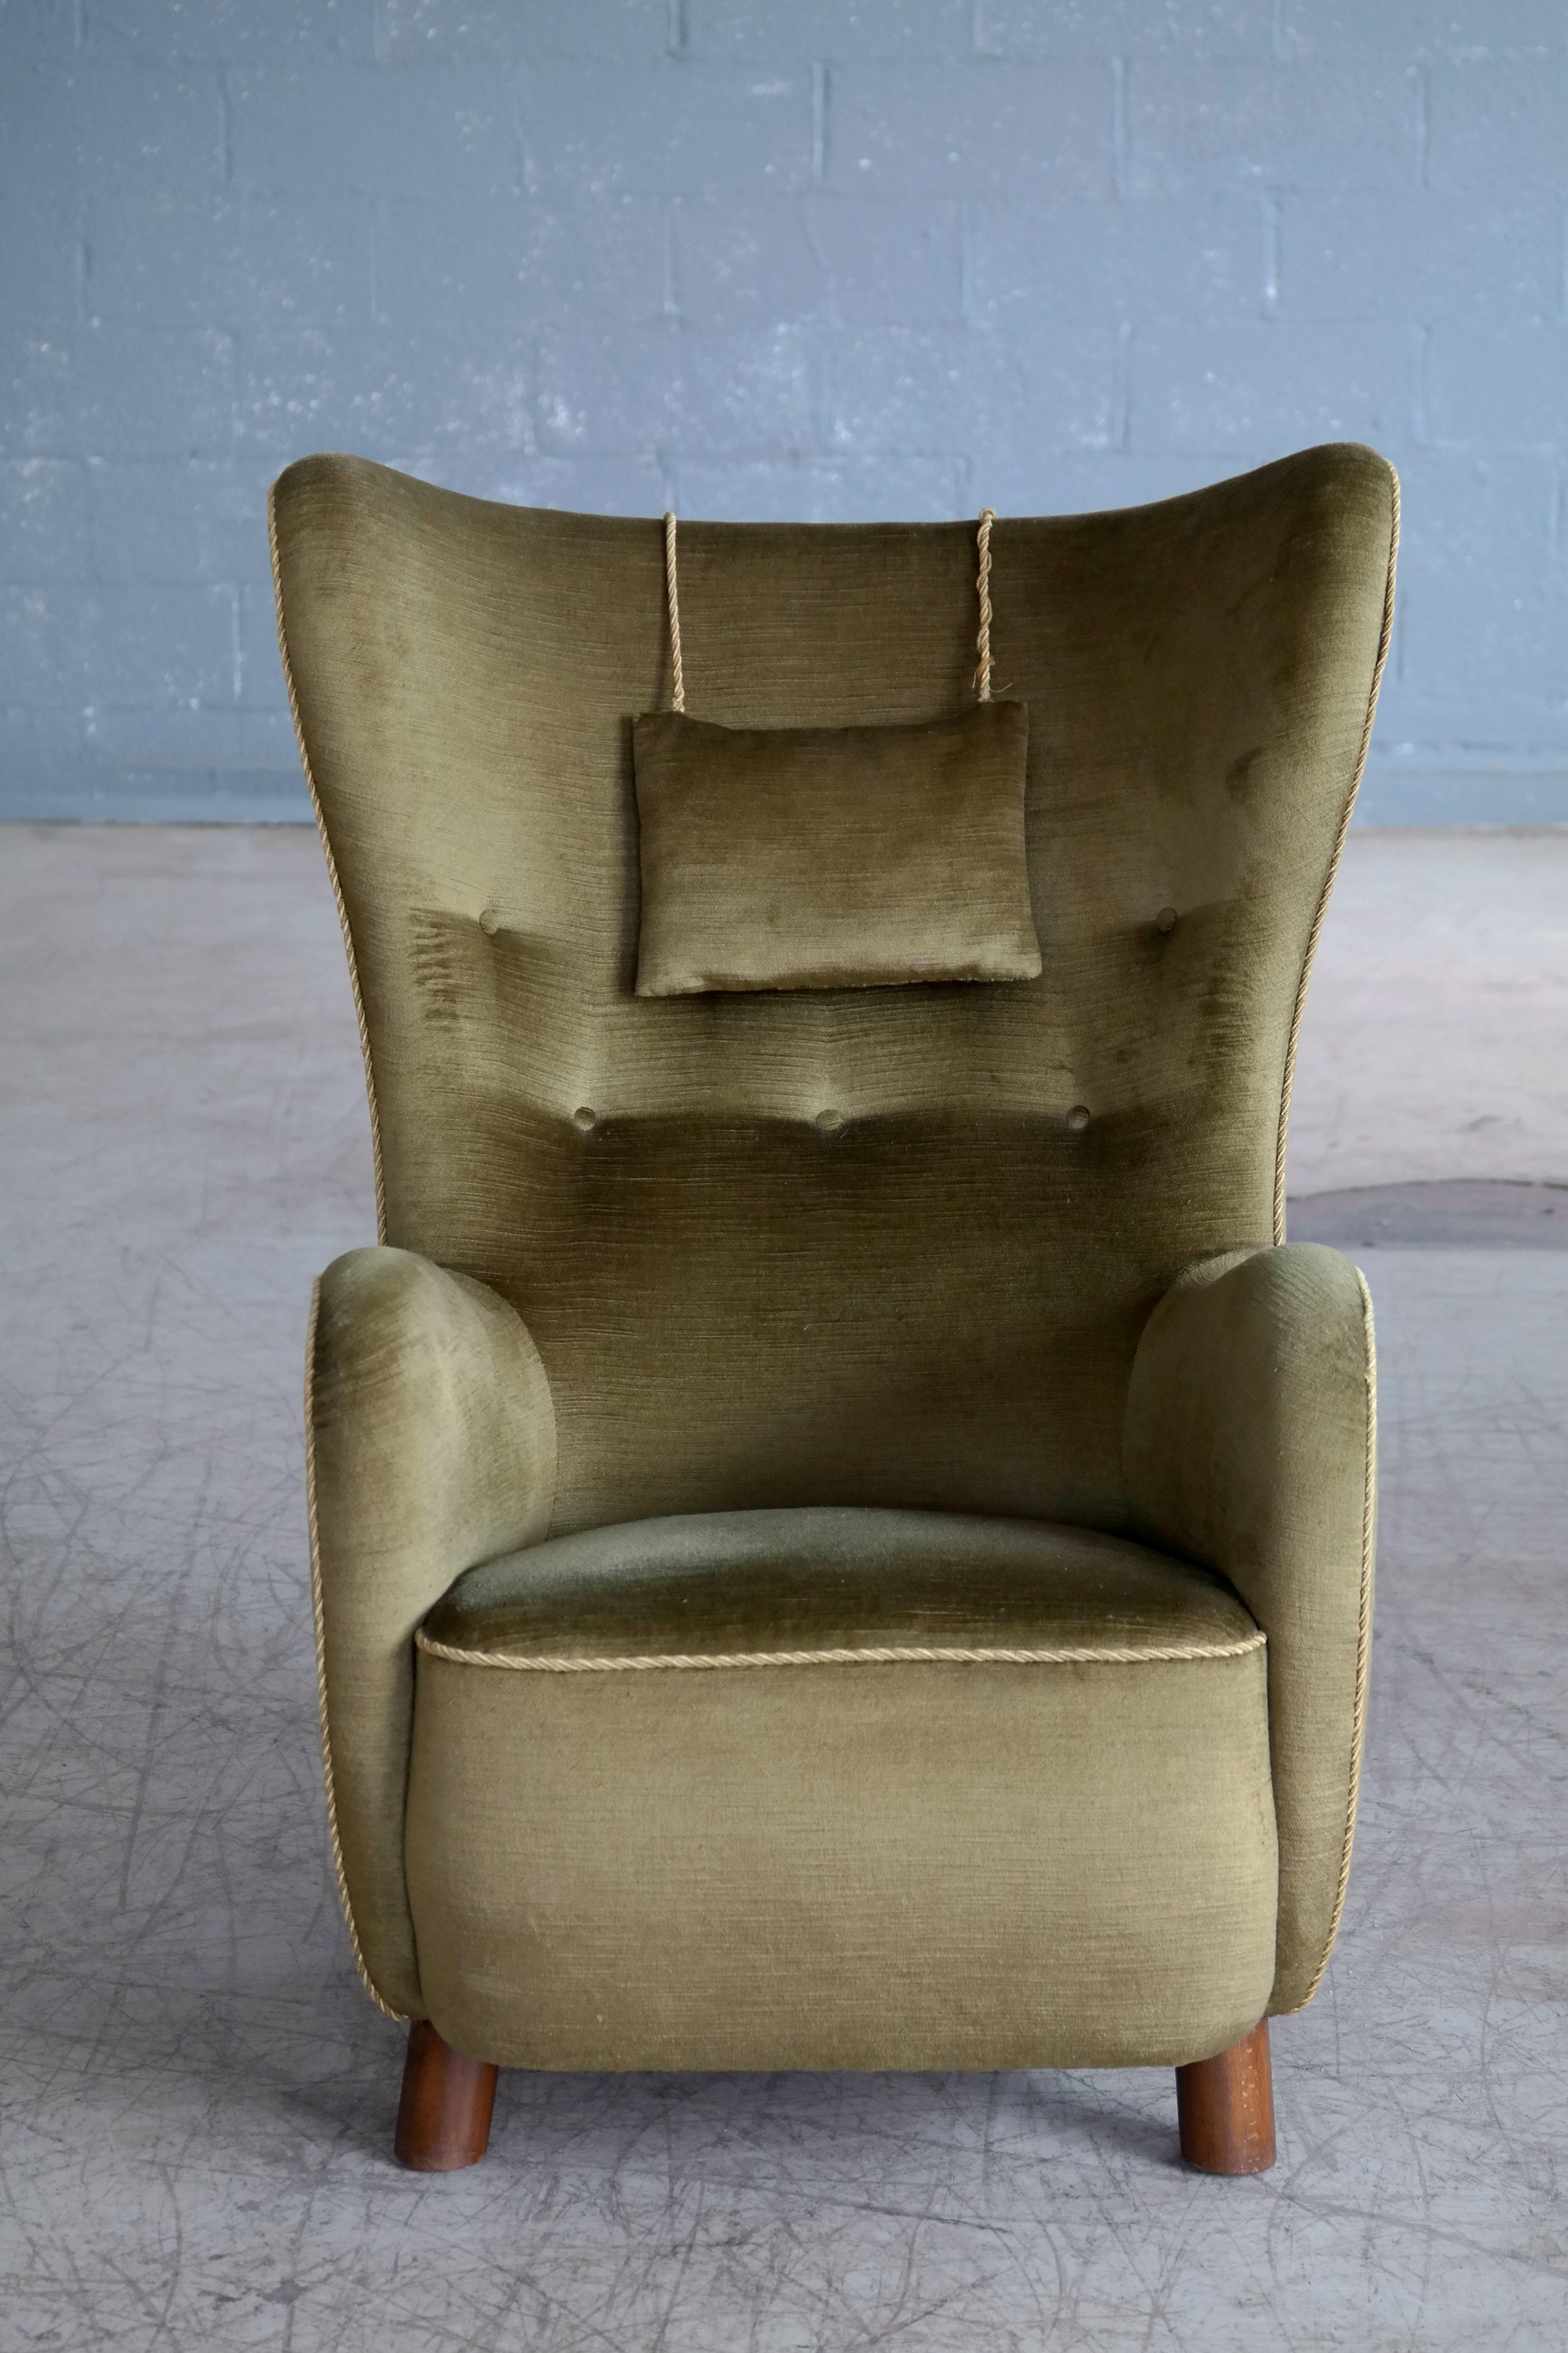 Beautiful Flemming Lassen attributed high back lounge chair made circa 1940. This iconic lounge chair is probably one of the most perfect high backs ever designed. Perfect statement piece with its ultra-elegant sensual shape yet very comfortable and